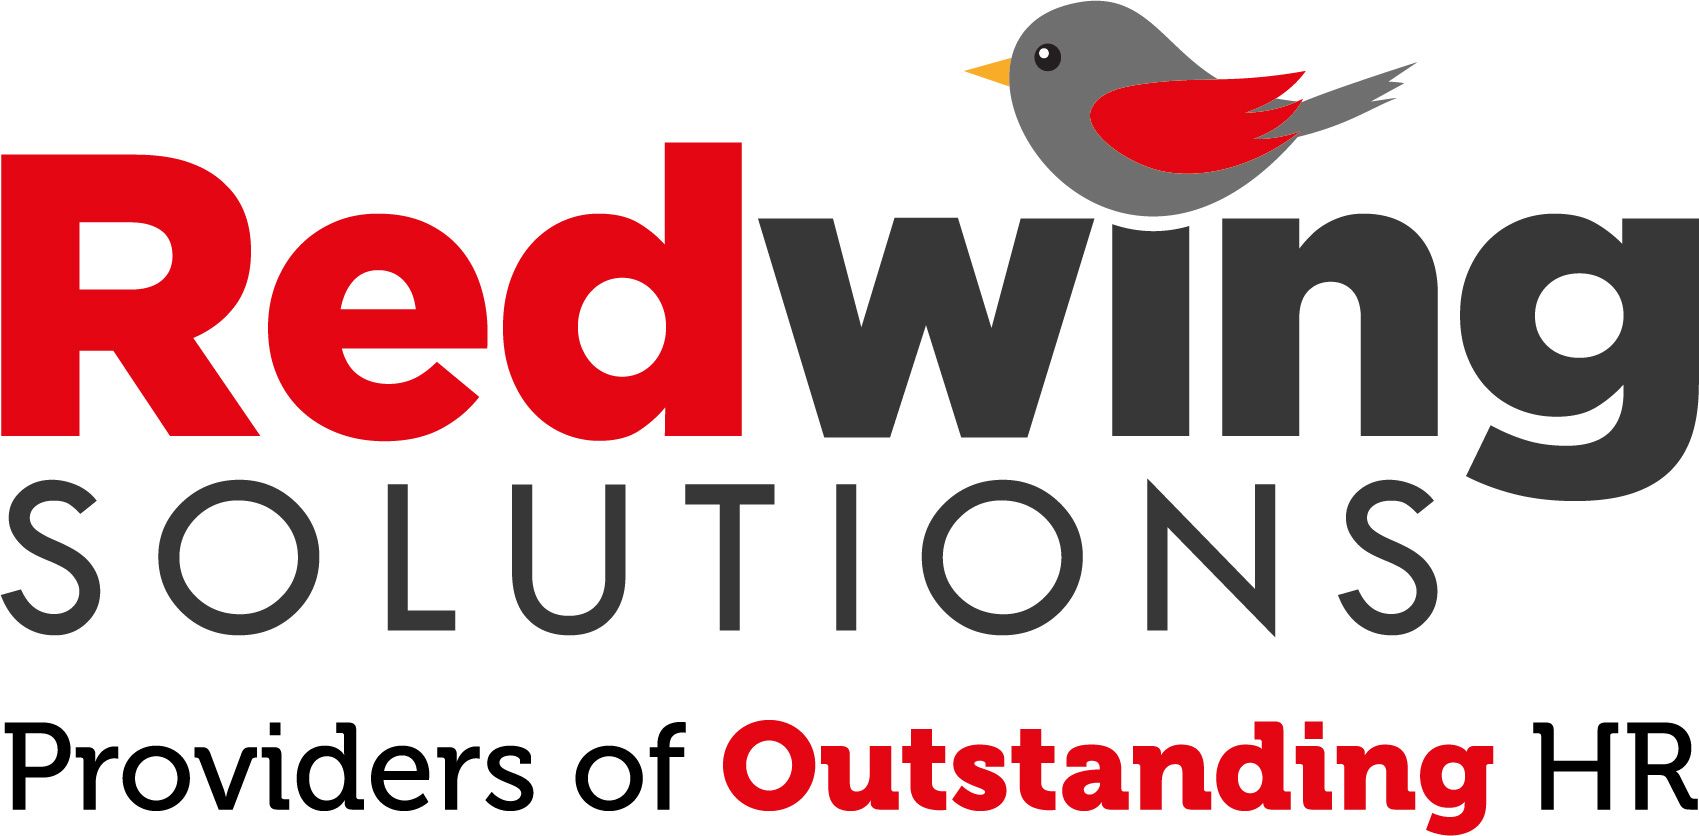 Redwing Solutions Limited